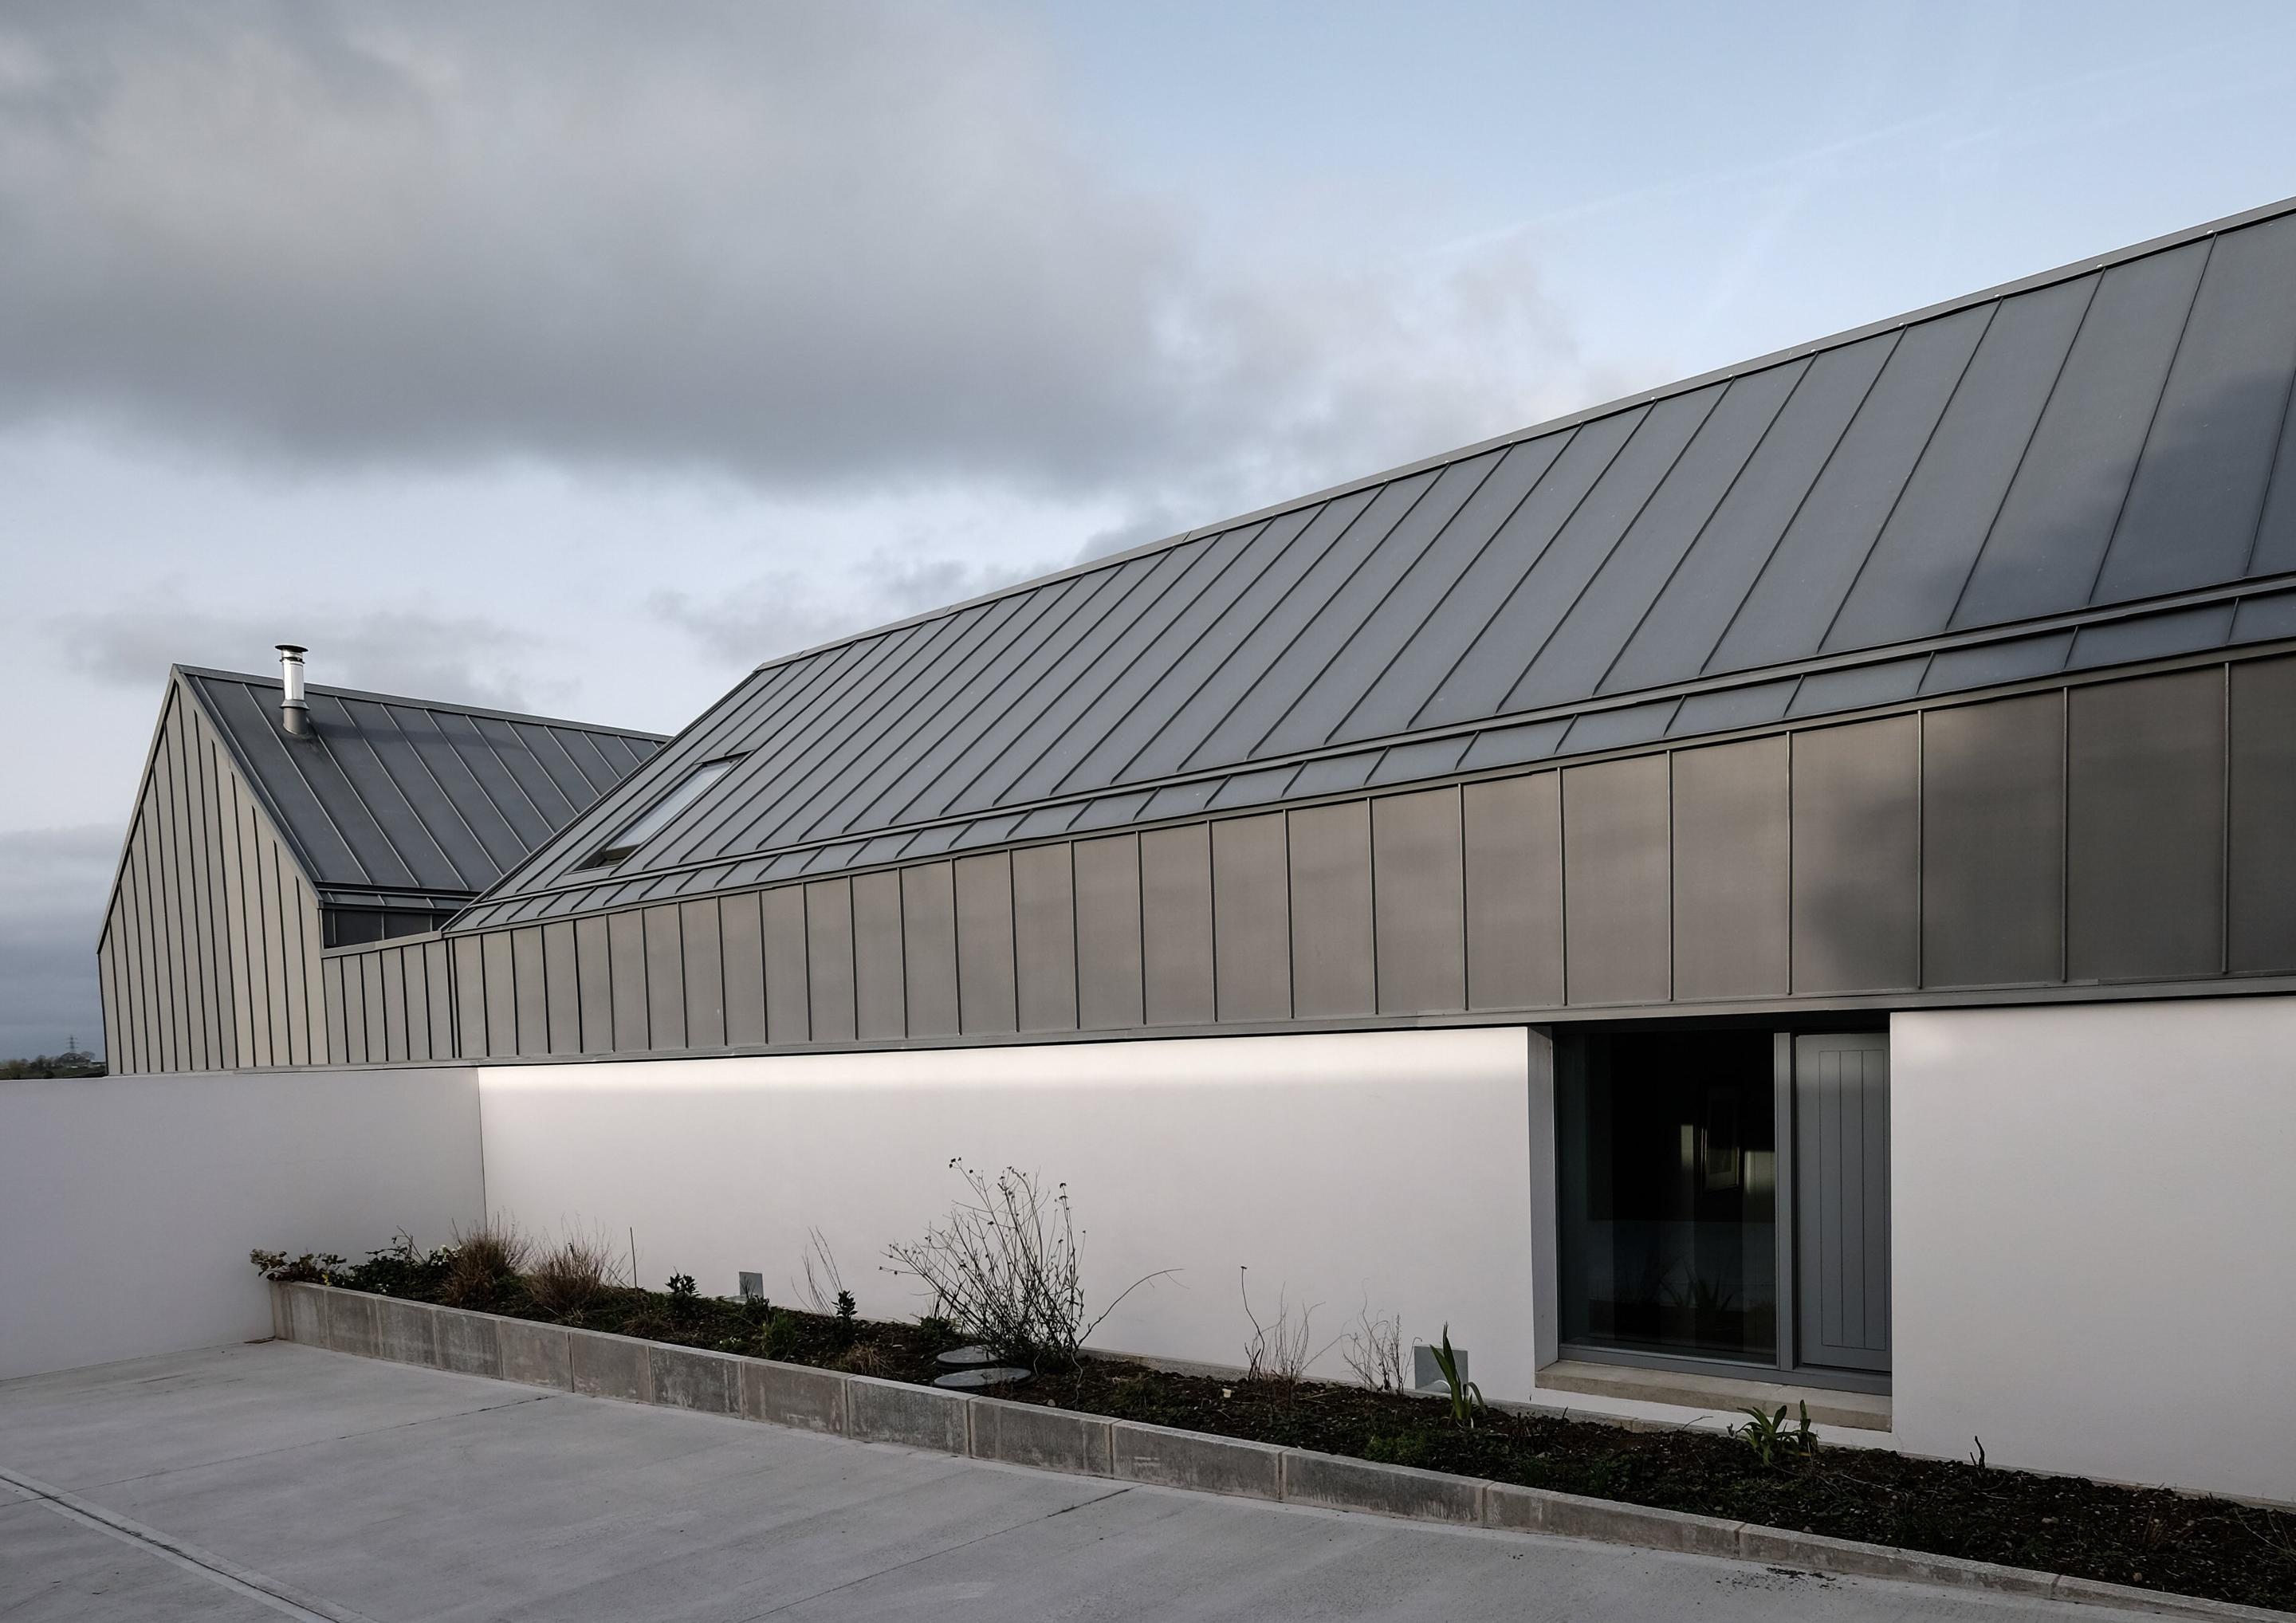 House Lessans, an exquisitely simple home in County Down designed by McGonigle McGrath, has been named RIBA House of the Year 2019